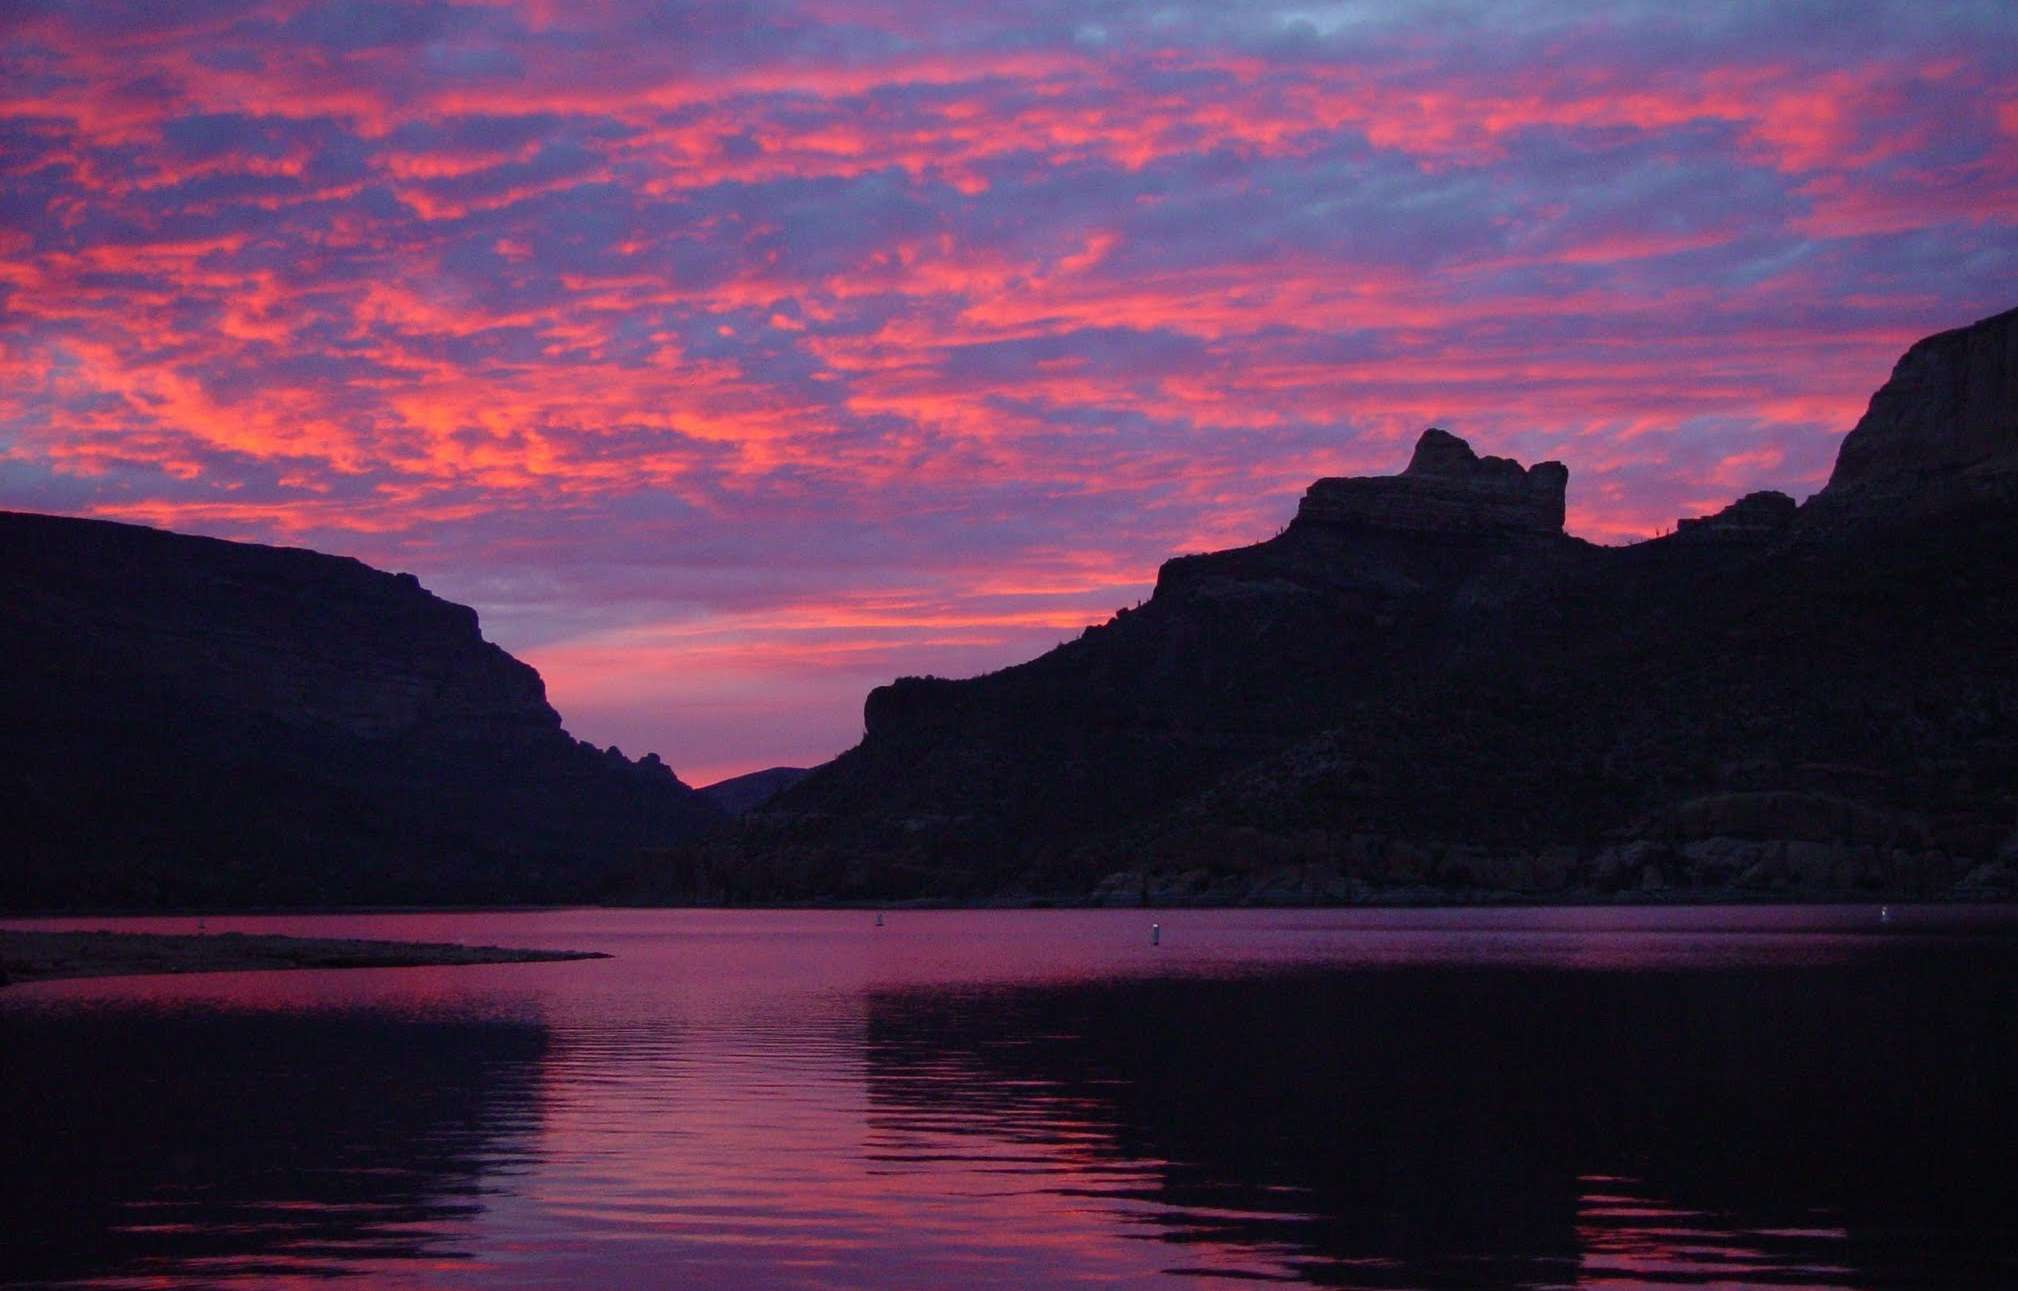 Apache Lake is part of the Tonto National Forest, and the Tonto National Monument that includes ancient cliff dwellings is four miles south of the reservoir.